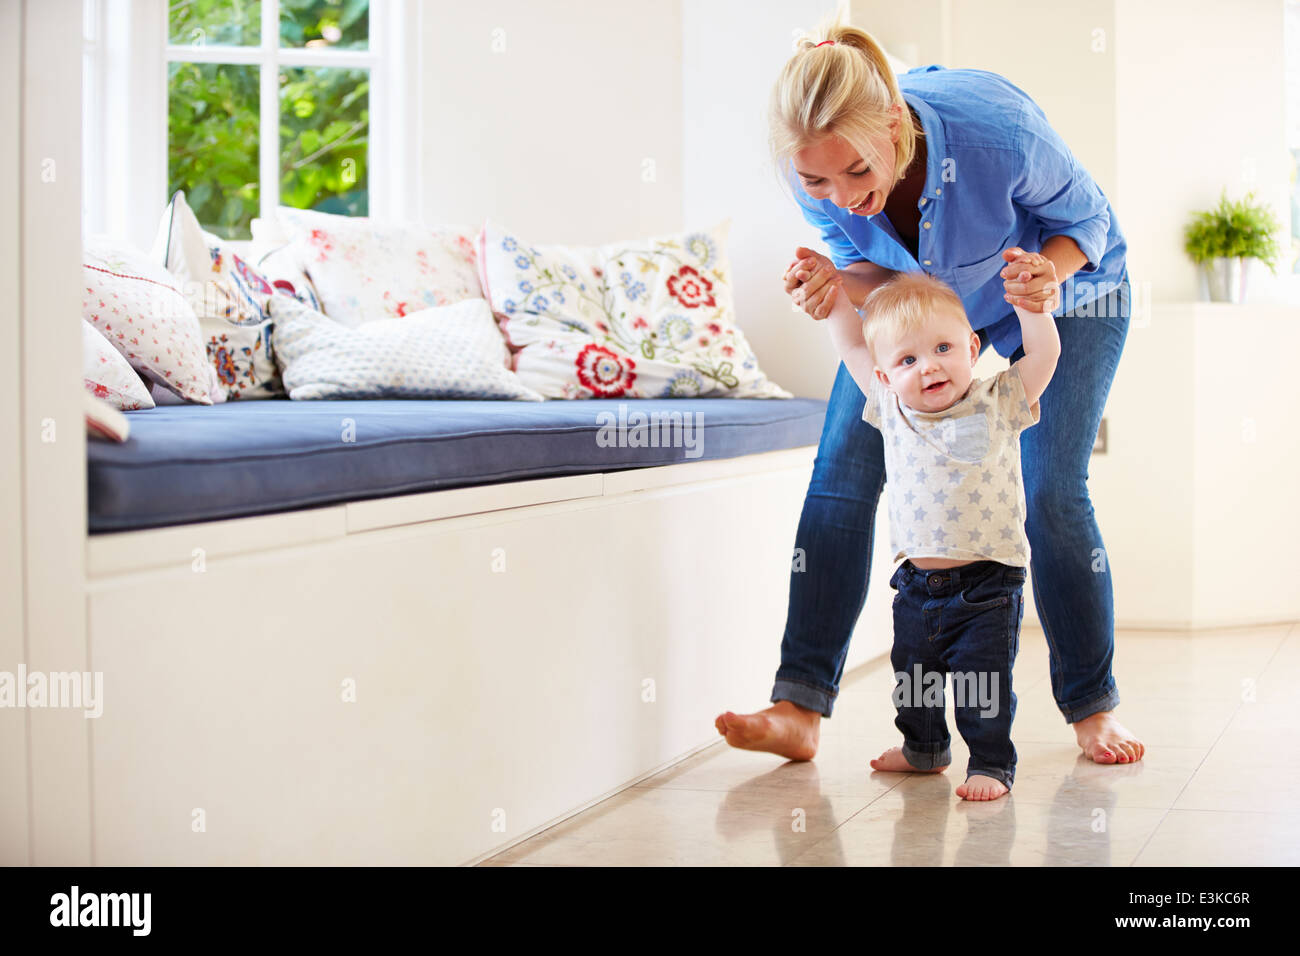 Mother Helping Young Son As He Learns To Walk Stock Photo